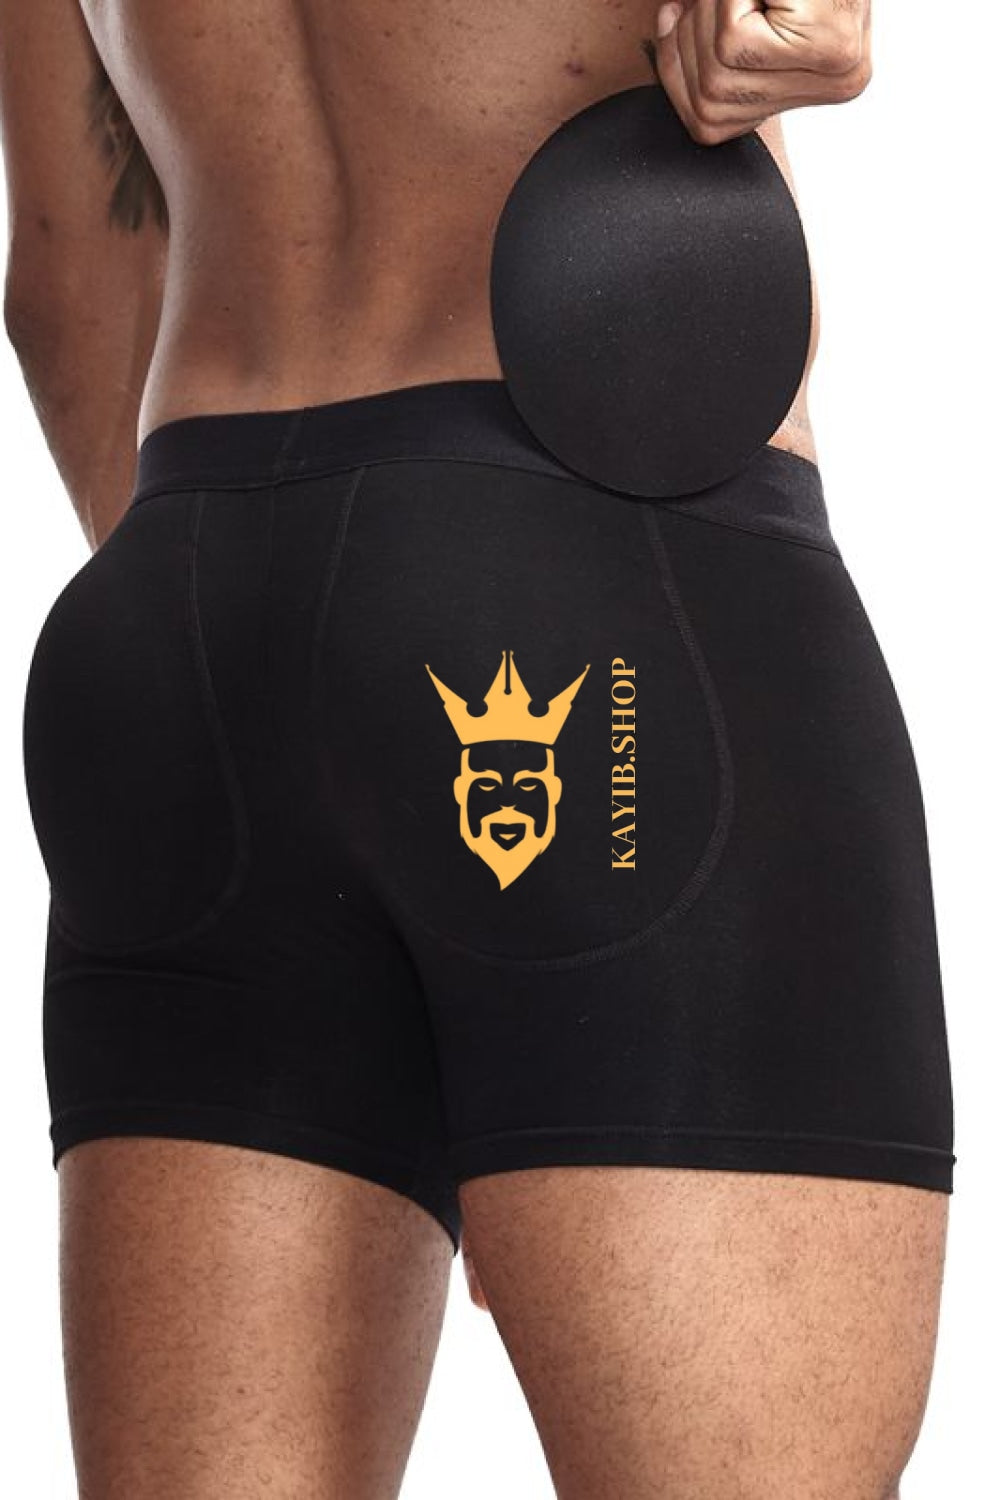 Sexy Butt Lifter Underwear - Enhance Your Curves and Boost Your Confidence - Customizable Padding for the Perfect Look - kayibstrore